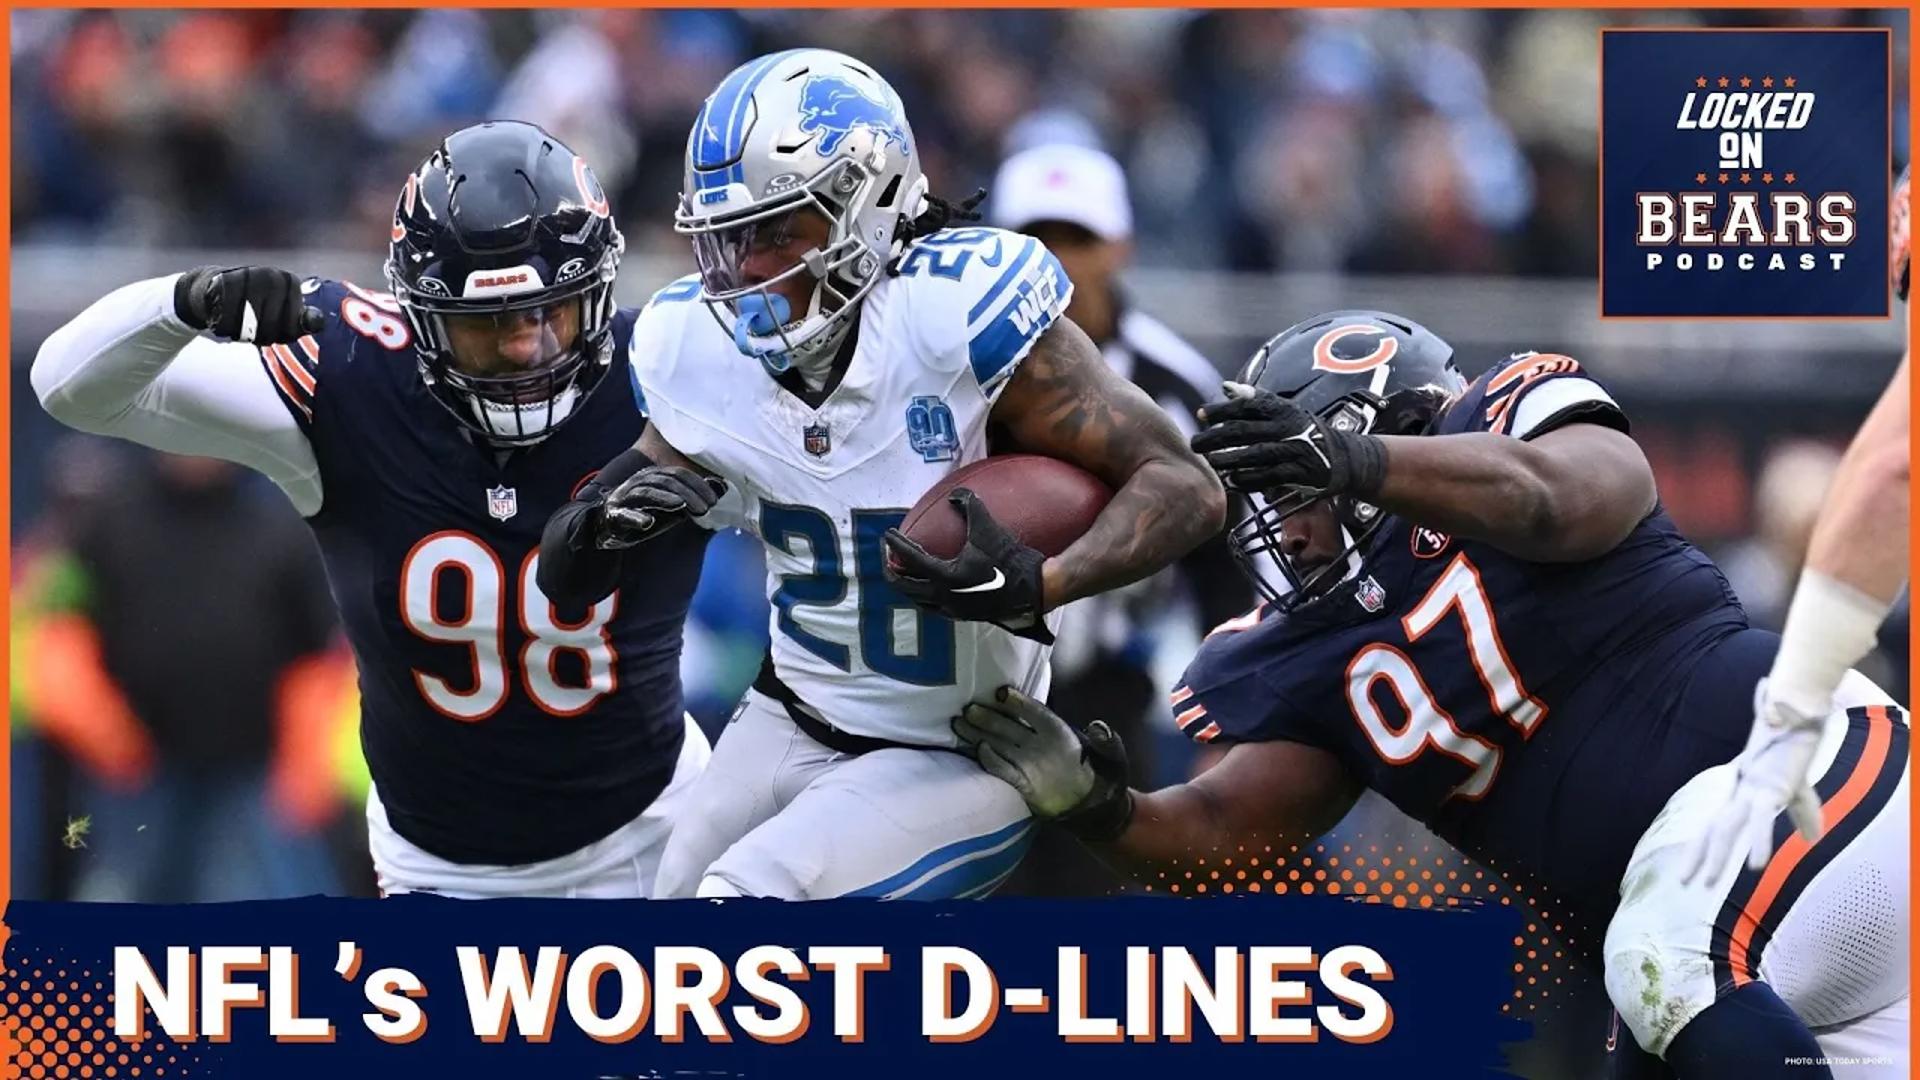 Do the Chicago Bears have the worst defensive line in the NFL right now